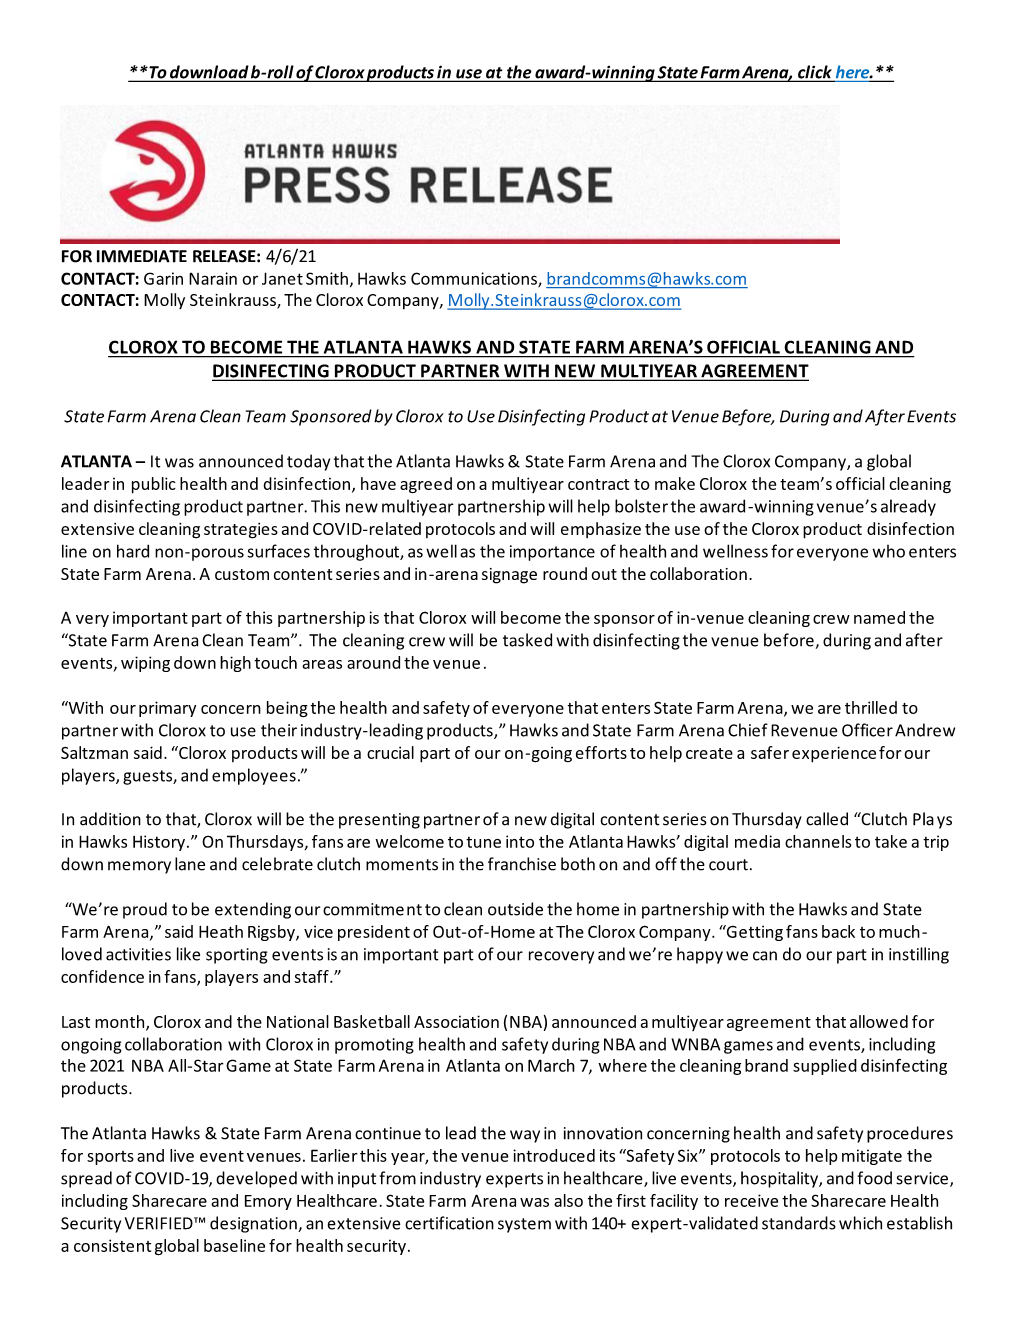 Clorox to Become the Atlanta Hawks and State Farm Arena’S Official Cleaning and Disinfecting Product Partner with New Multiyear Agreement